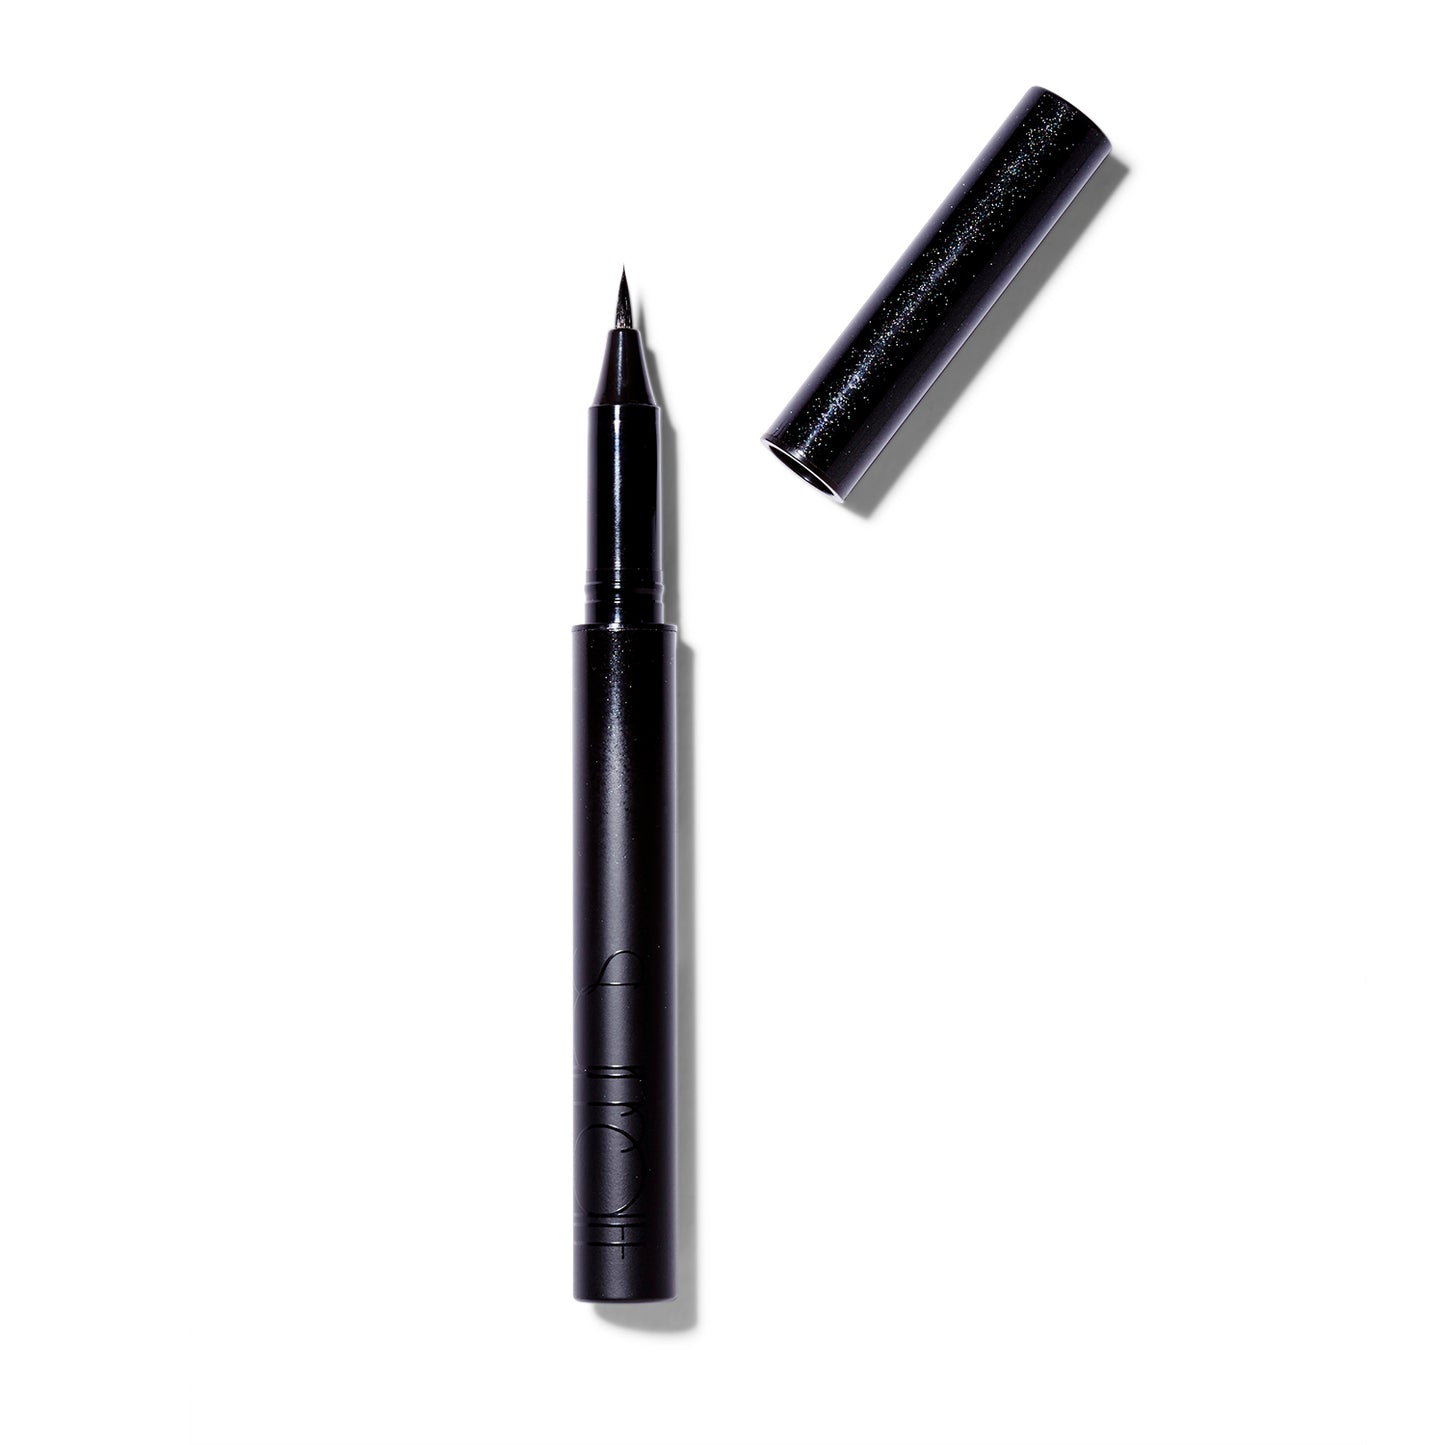 The Surratt Autographique Liquid Eyeliner Pen in Chat Noir, a deep black. The cap of the pen is off and at an angle on the right side of the pen. The pen is made of individual hairs and goes to a sharp point.